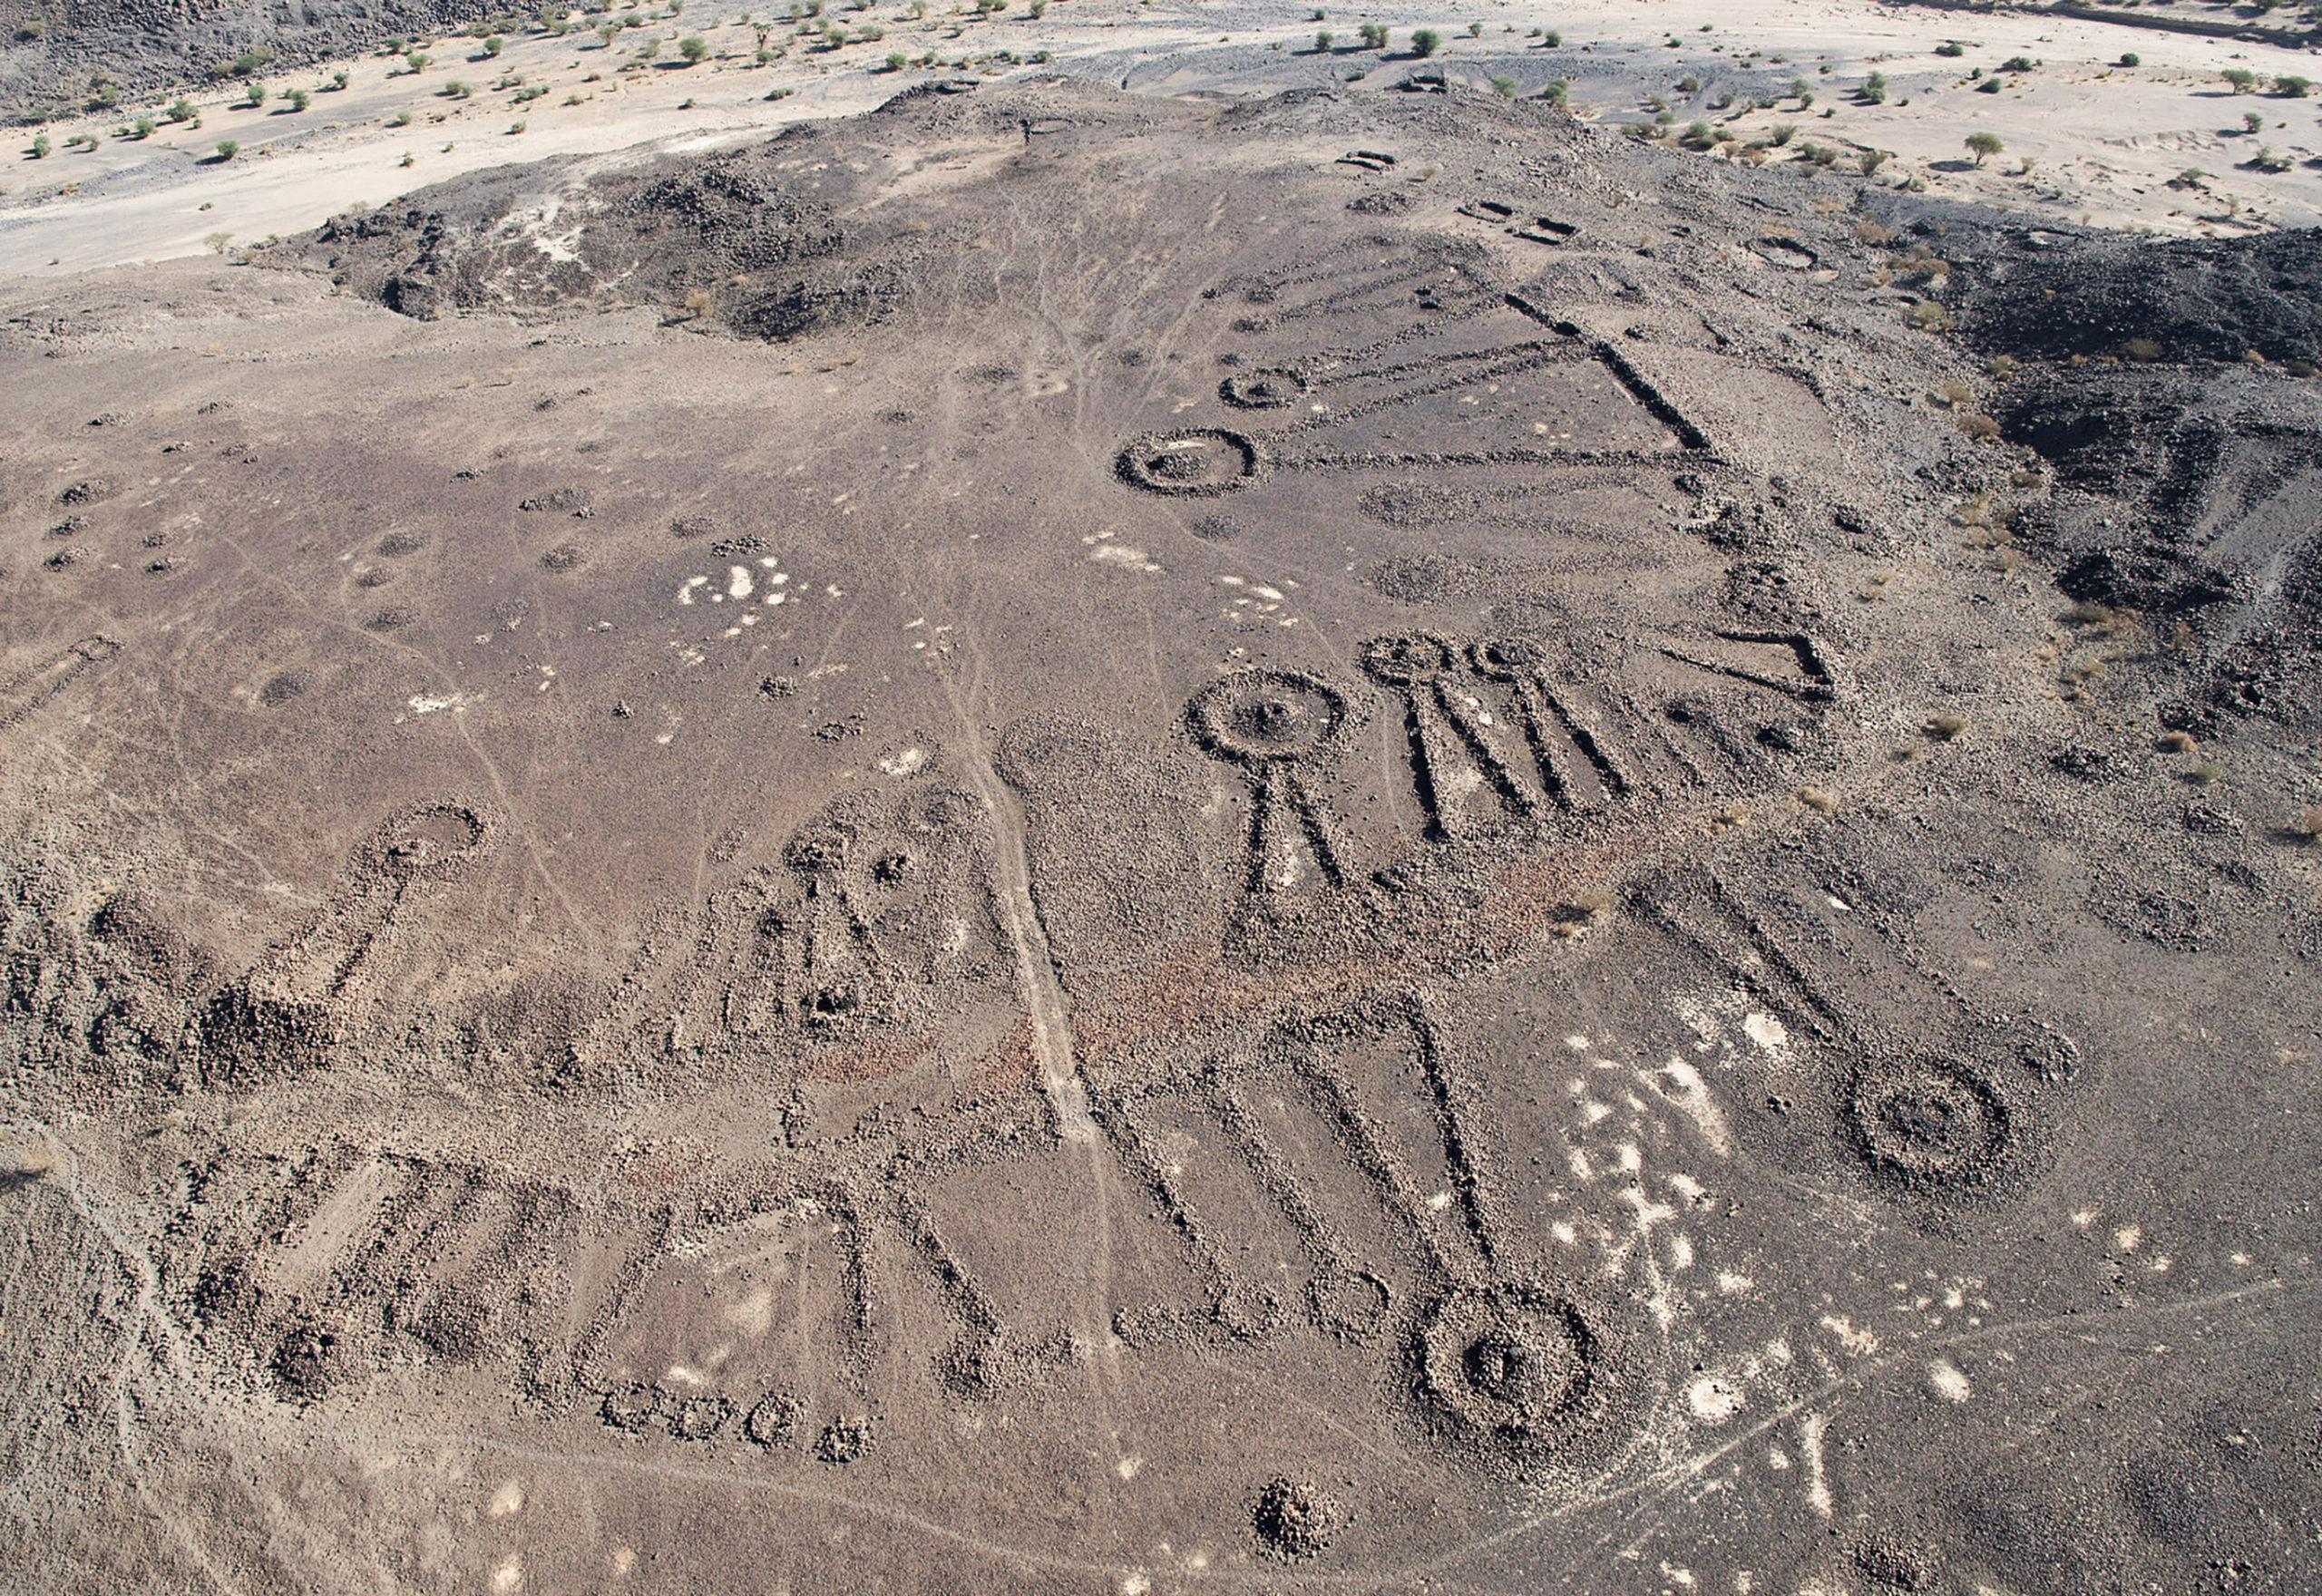 Mysterious ancient tombs reveal 4,500-year-old highway network in north-west Arabia